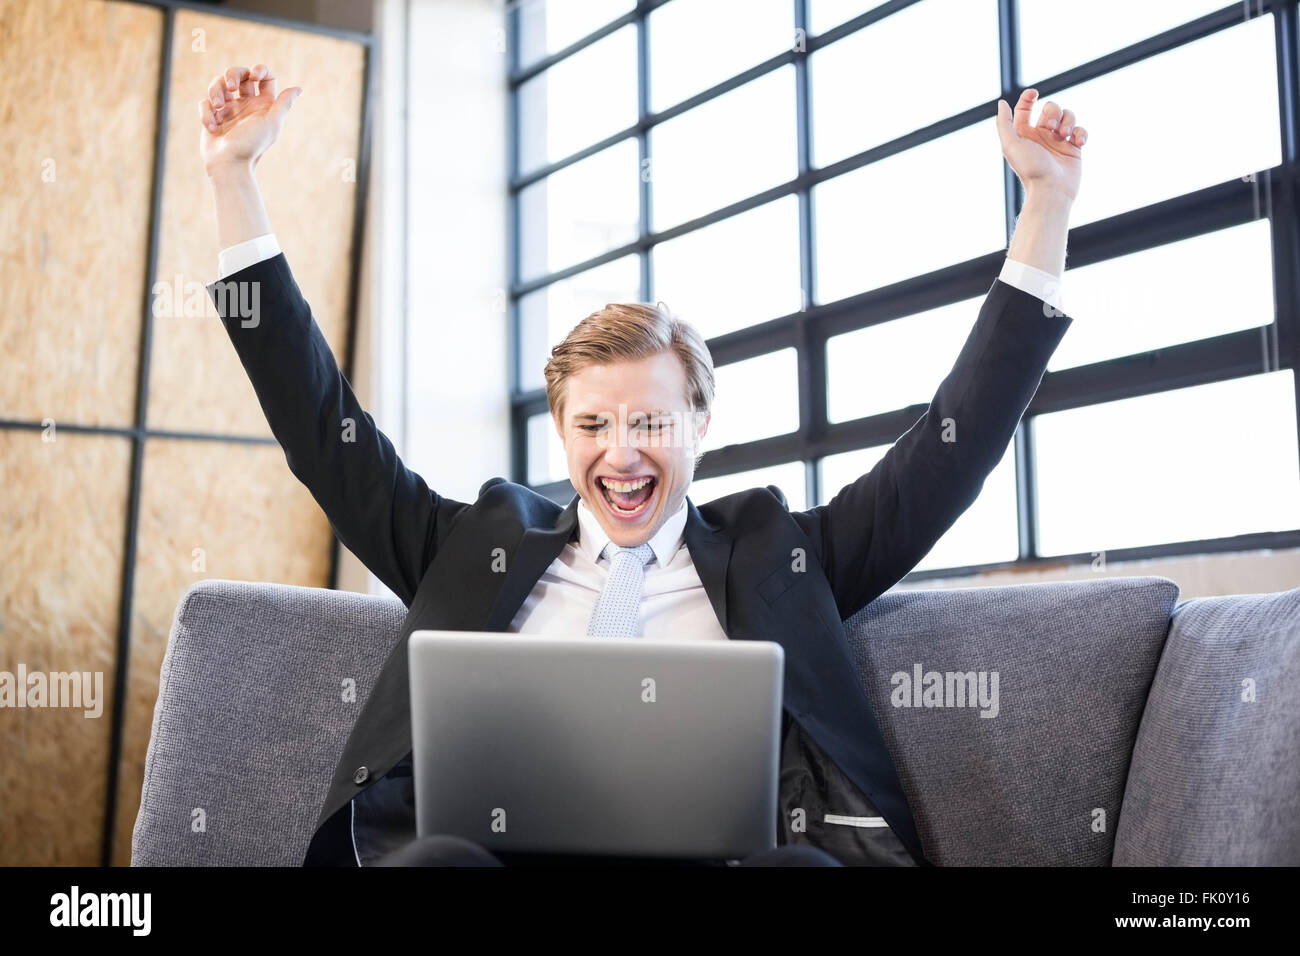 Businessman raising hands with excitement in front of laptop Stock Photo